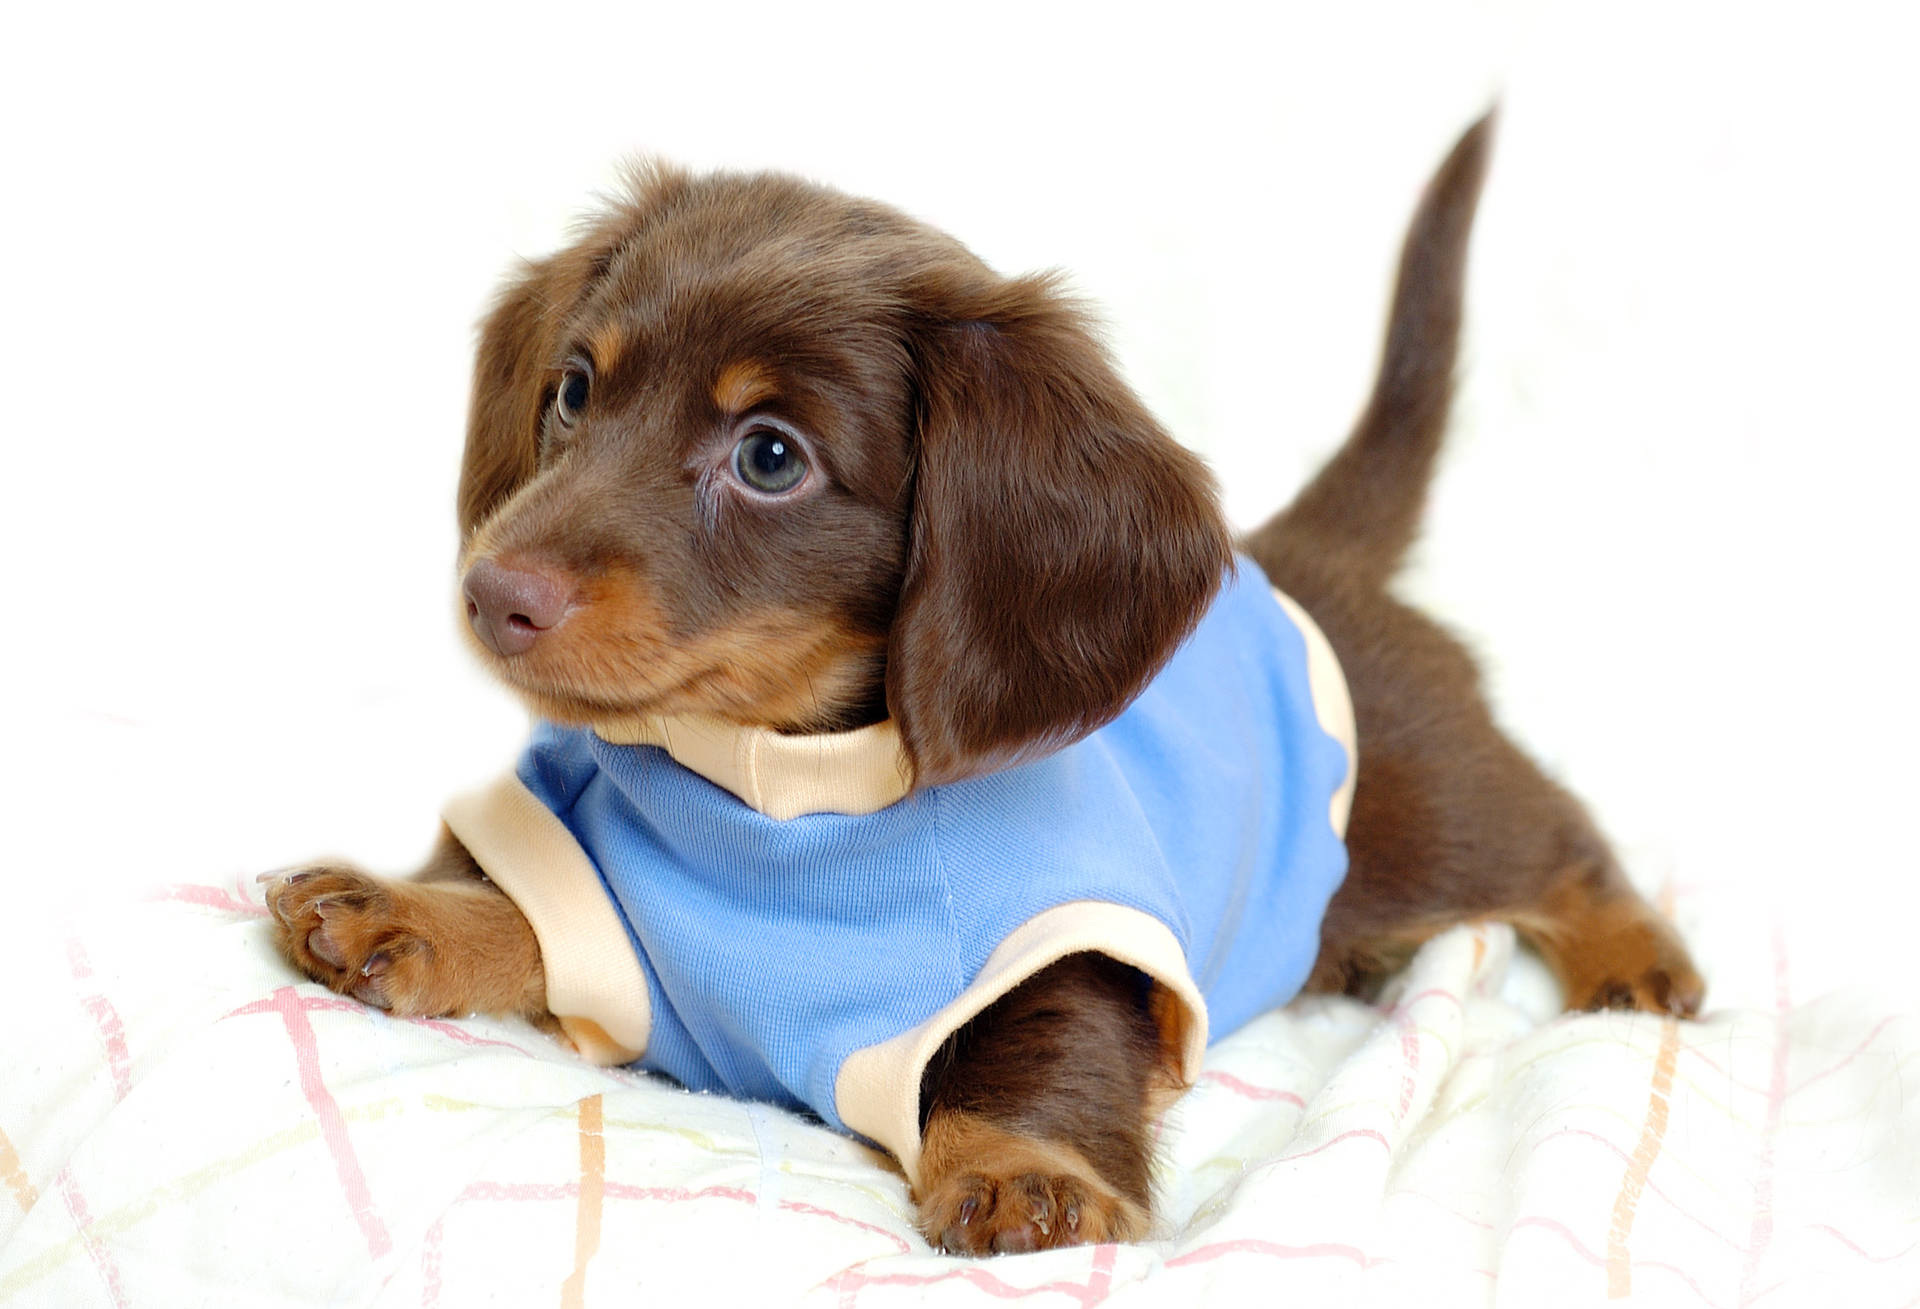 Cute brown puppy image wallpaper.